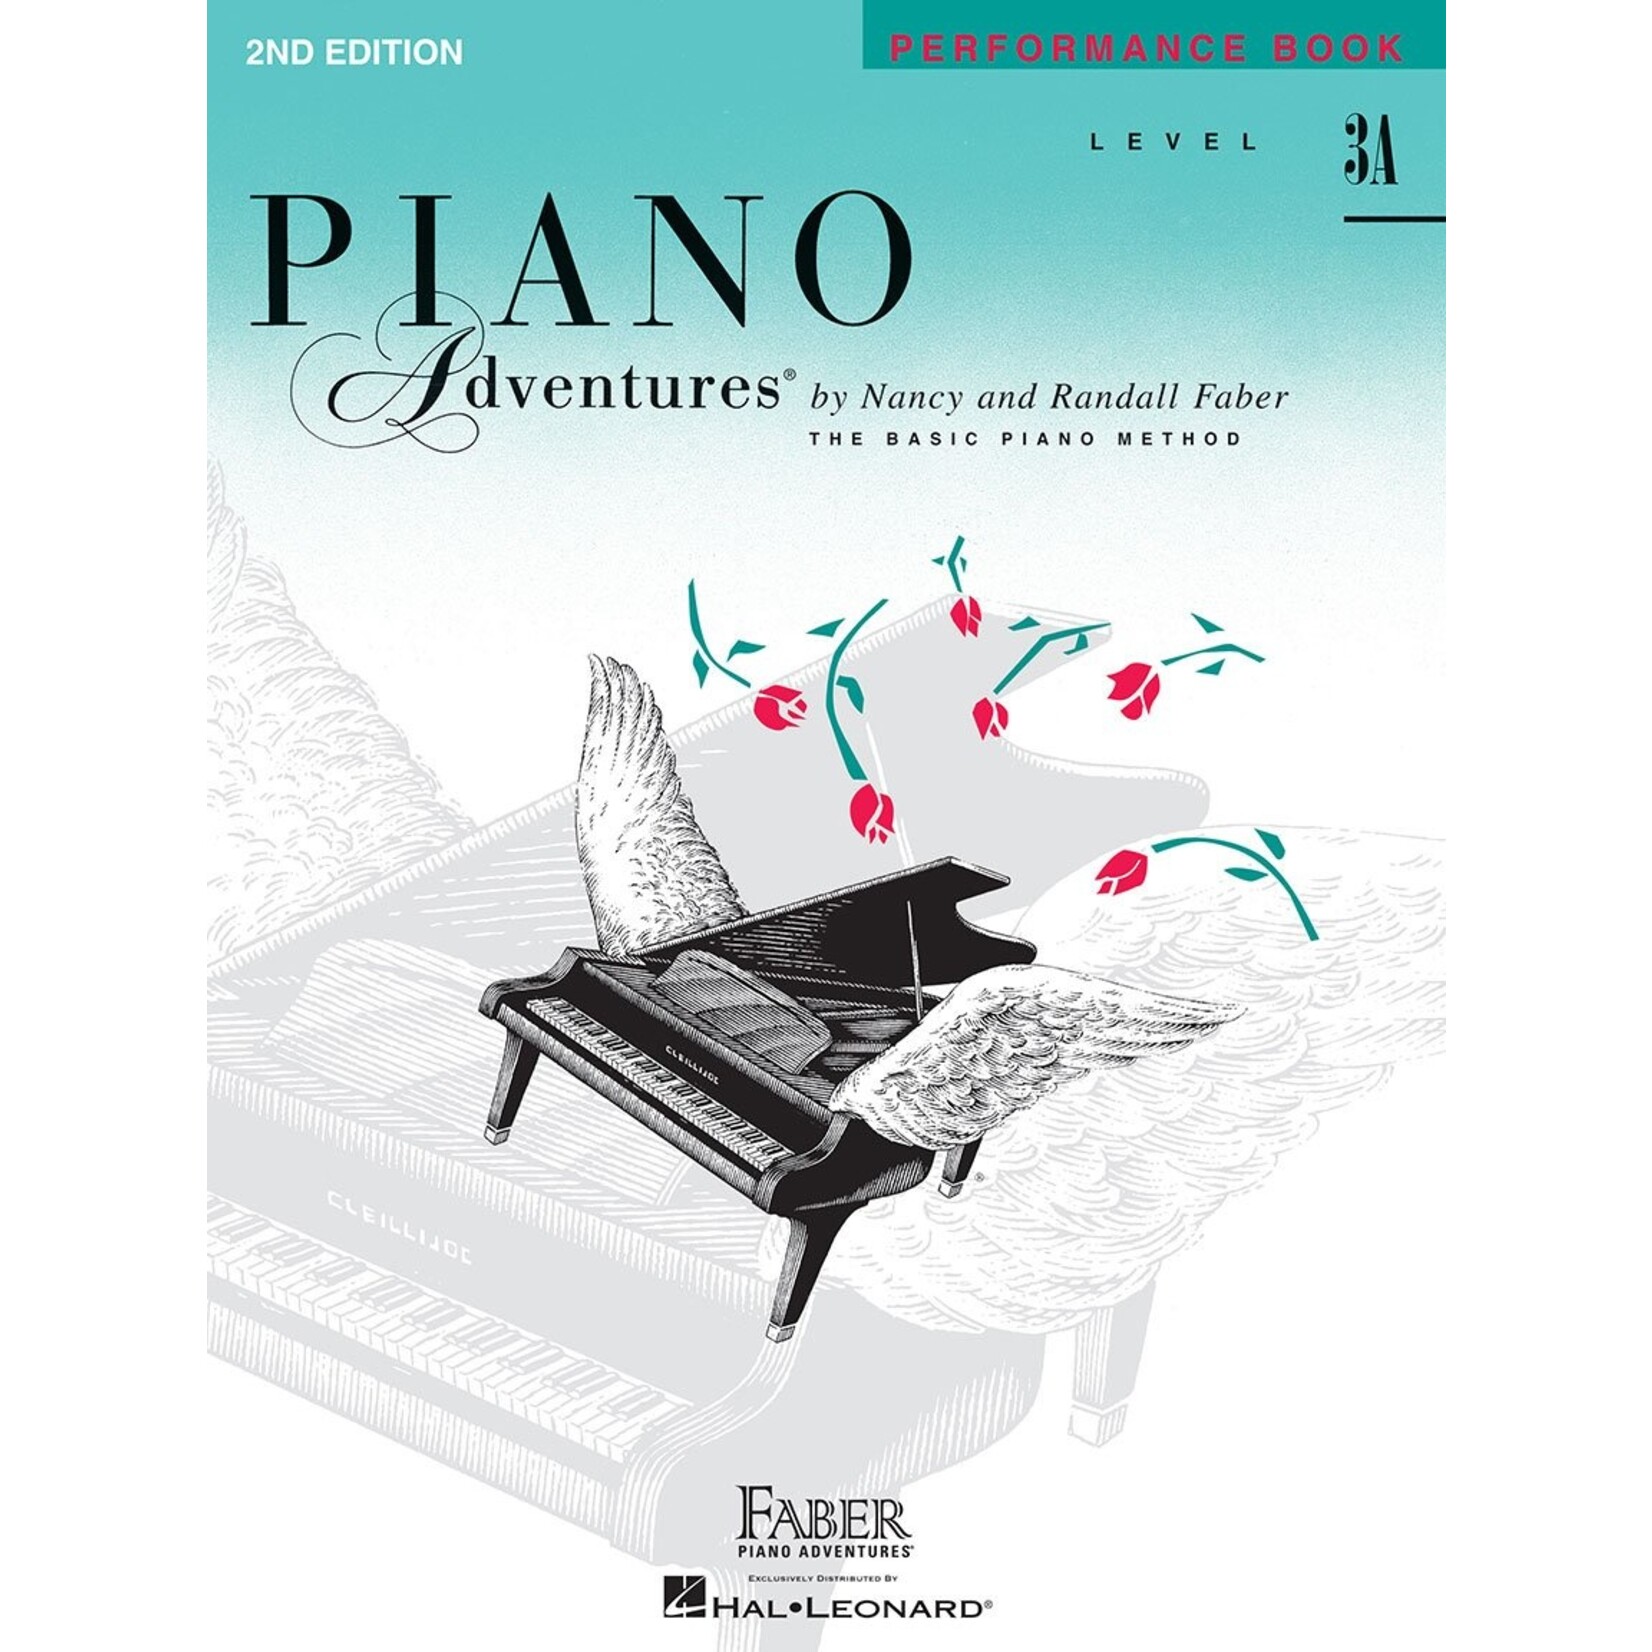 Faber Piano Adventures Level 3A - Performance Book